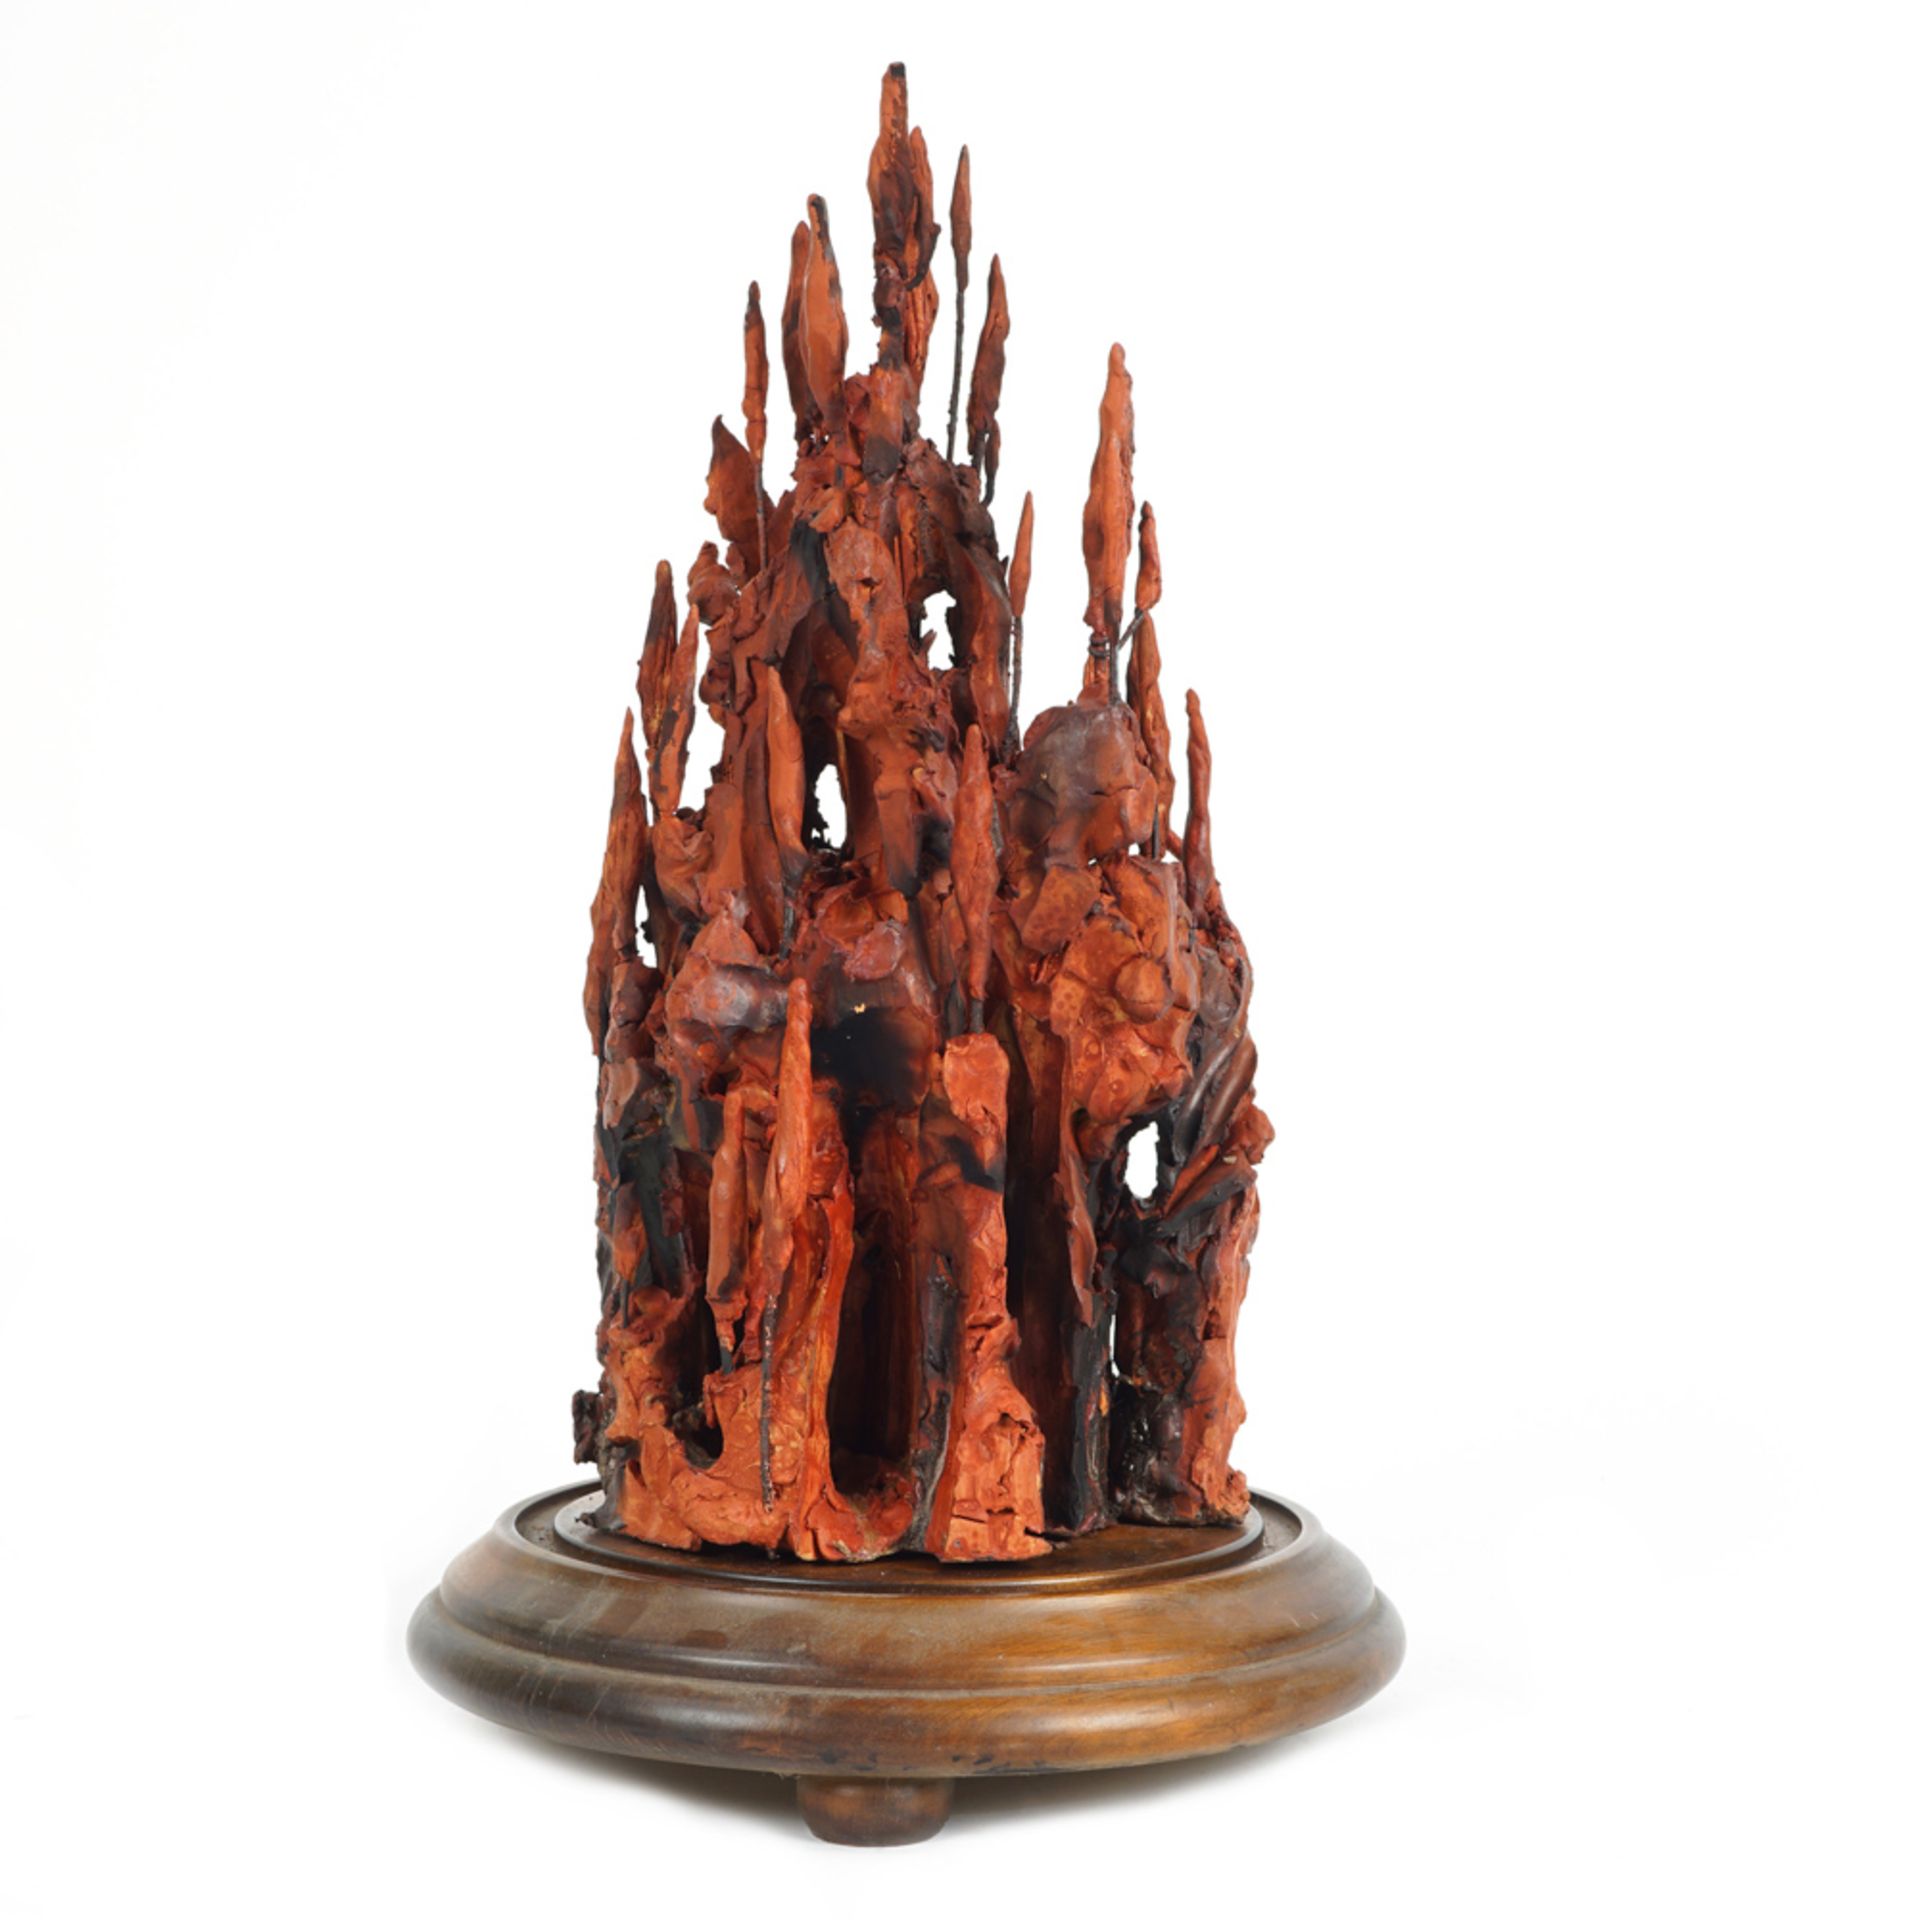 terracotta and metal nativity scene sculpture - Image 2 of 2